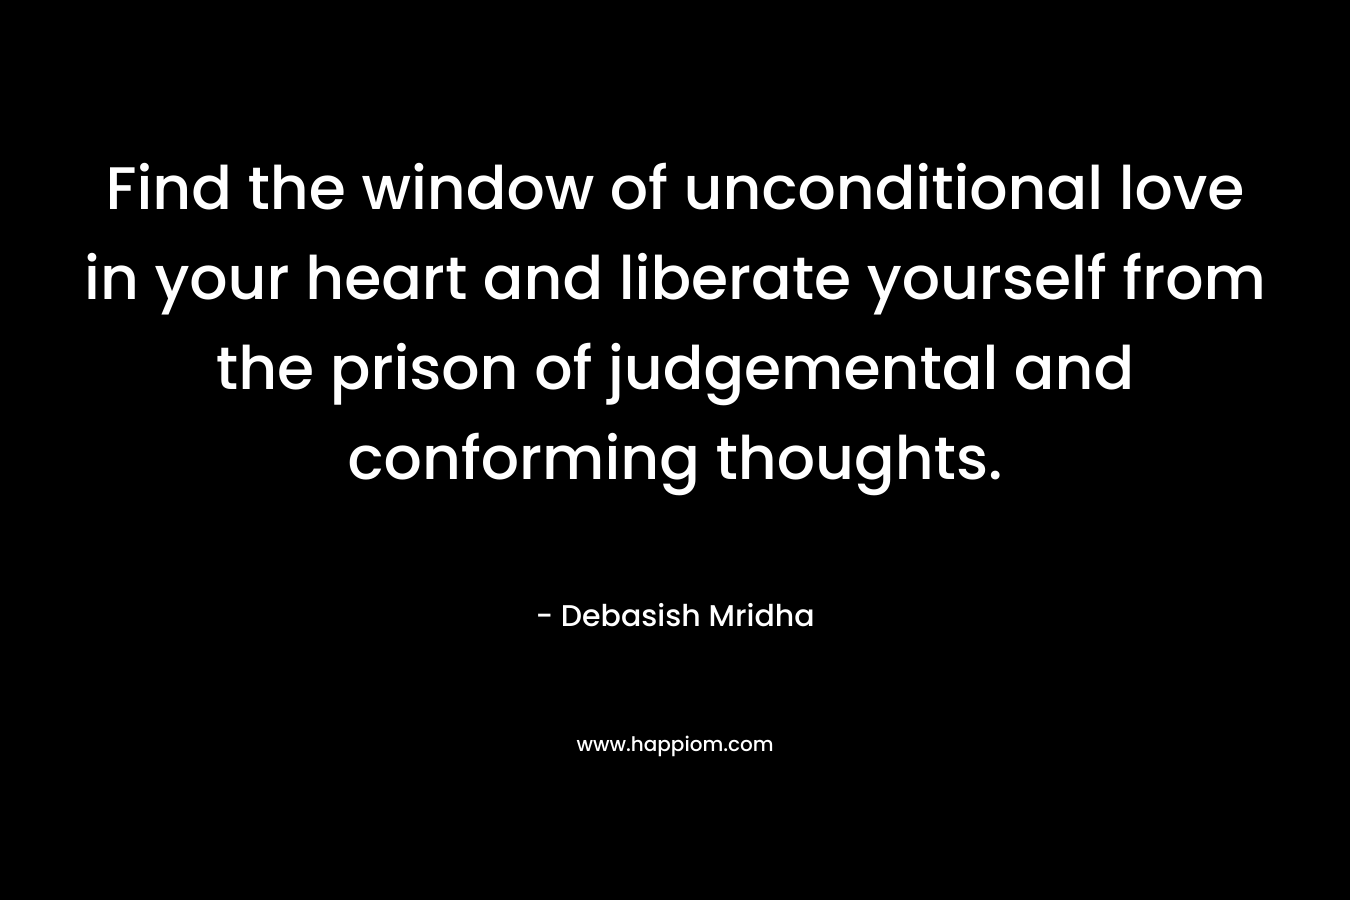 Find the window of unconditional love in your heart and liberate yourself from the prison of judgemental and conforming thoughts.